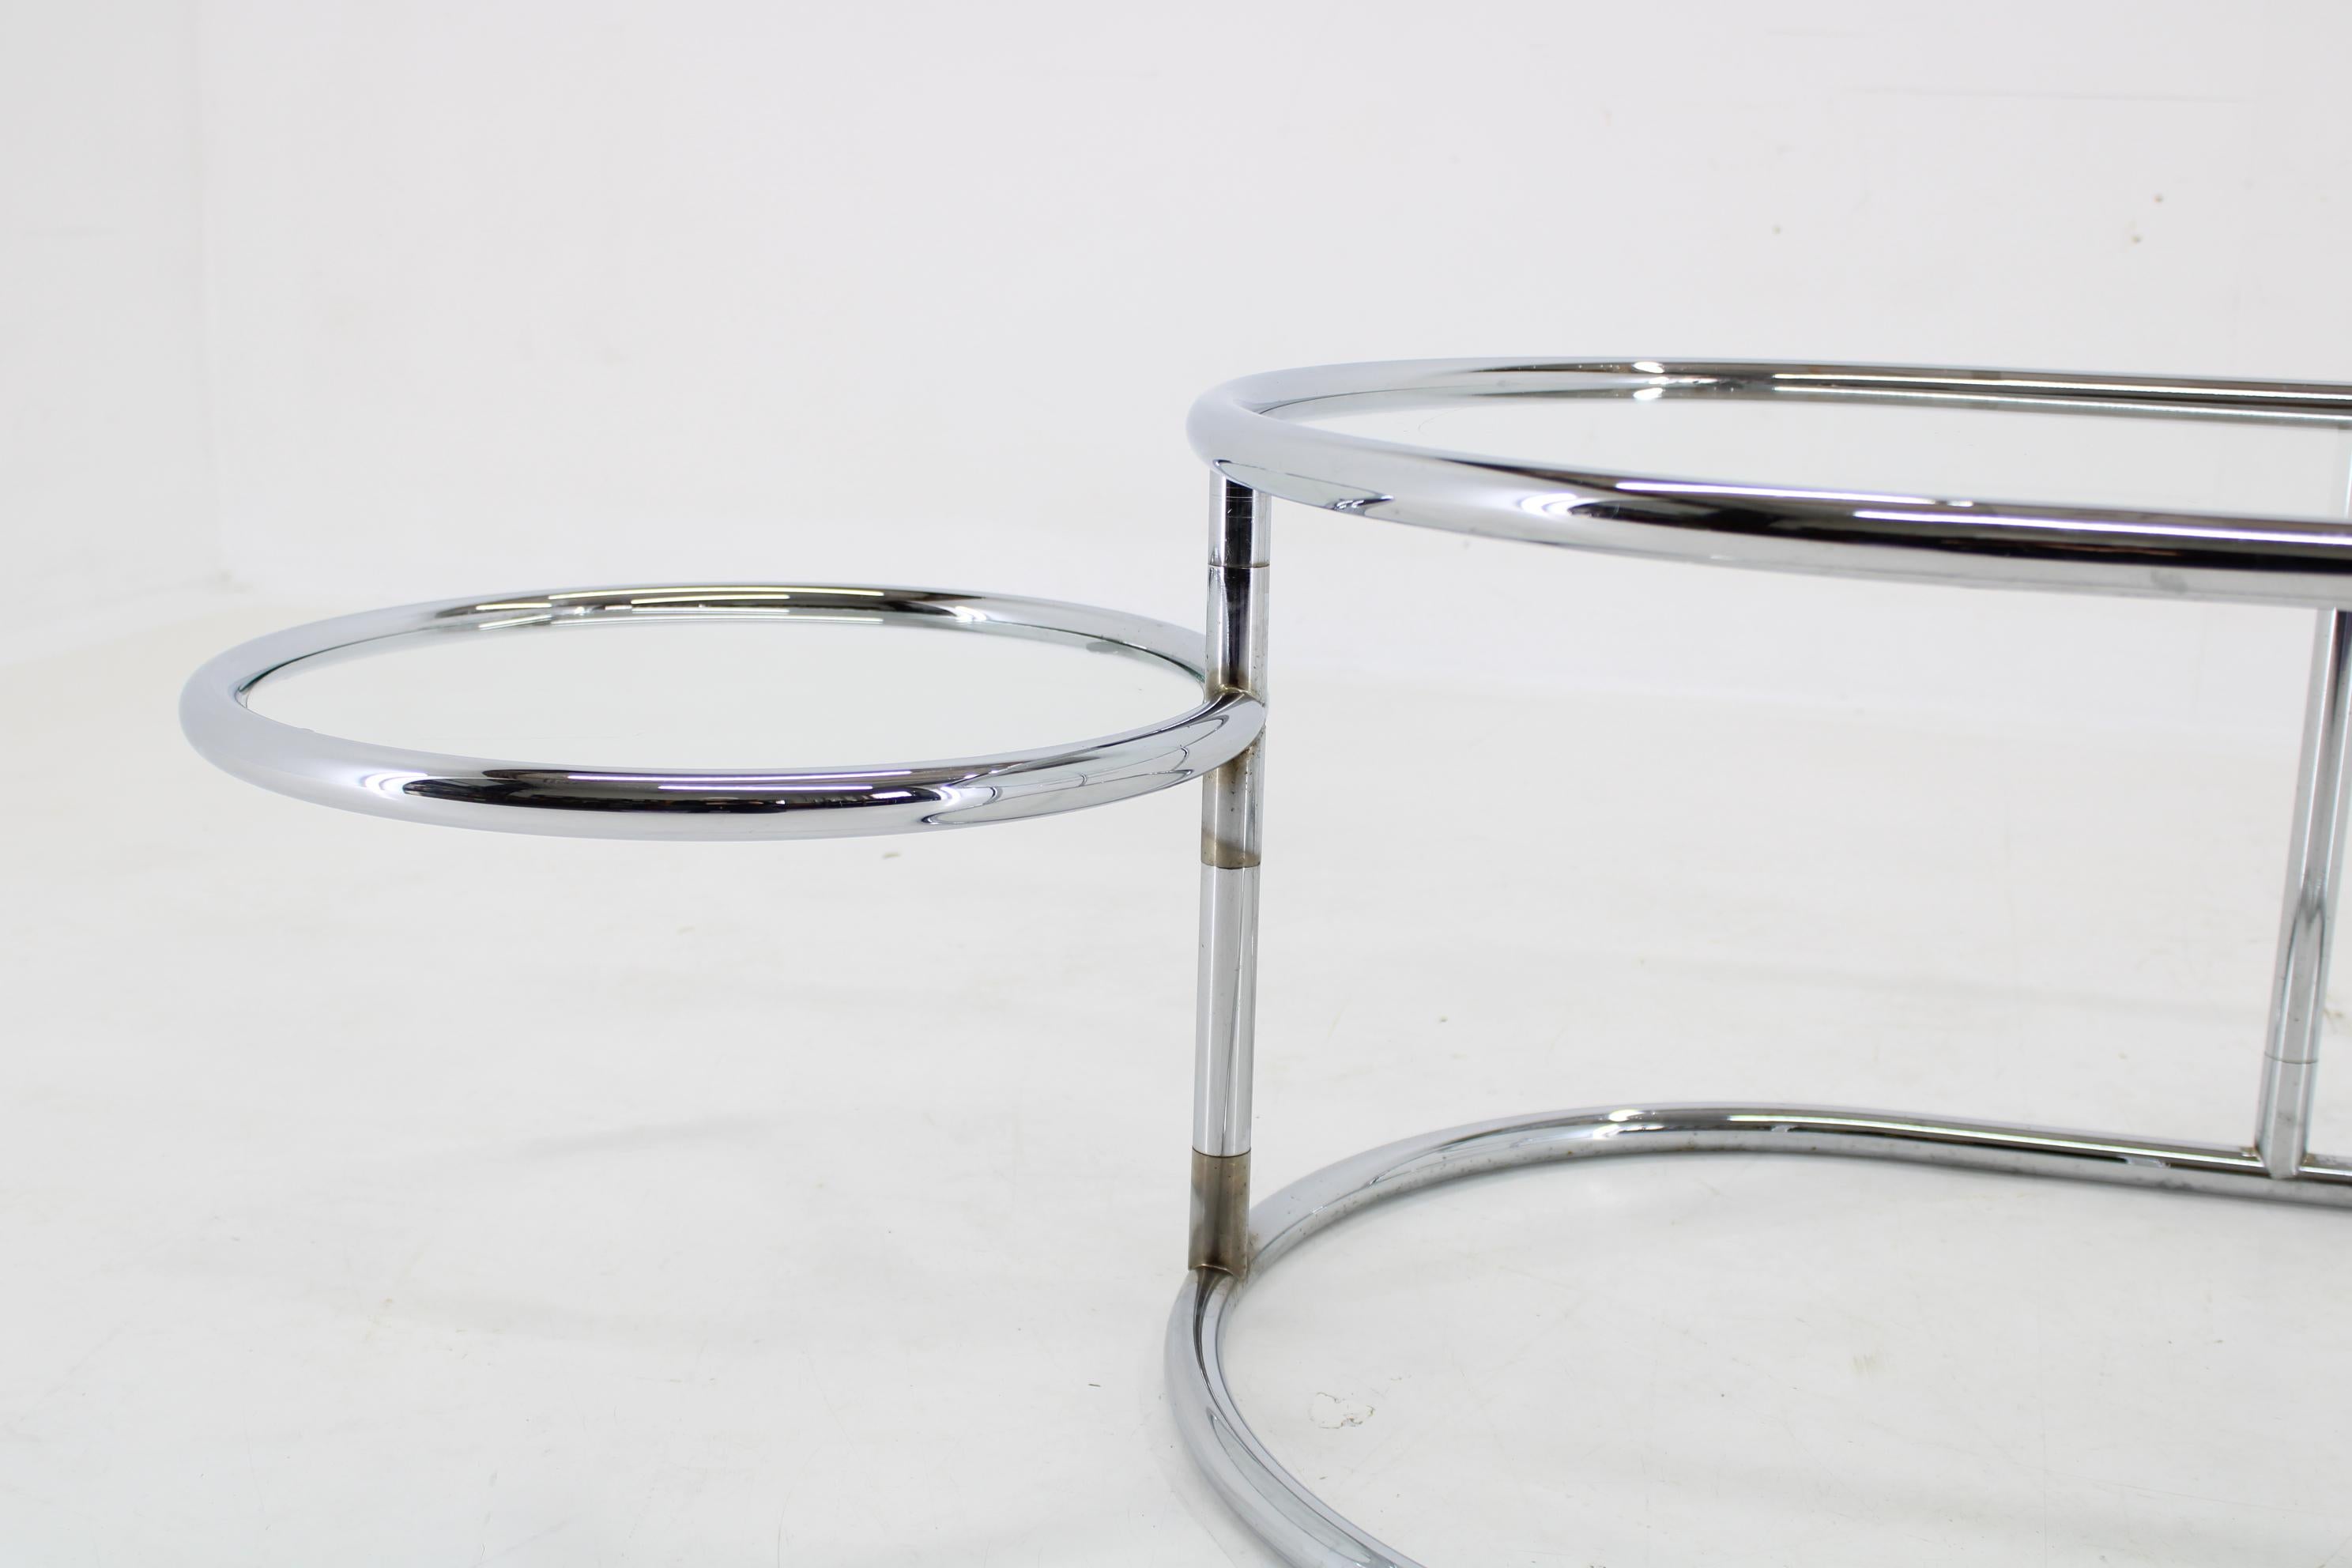 Late 20th Century 1980s Chrome Plated Tubular Coffee Table with Glass Top, Germany